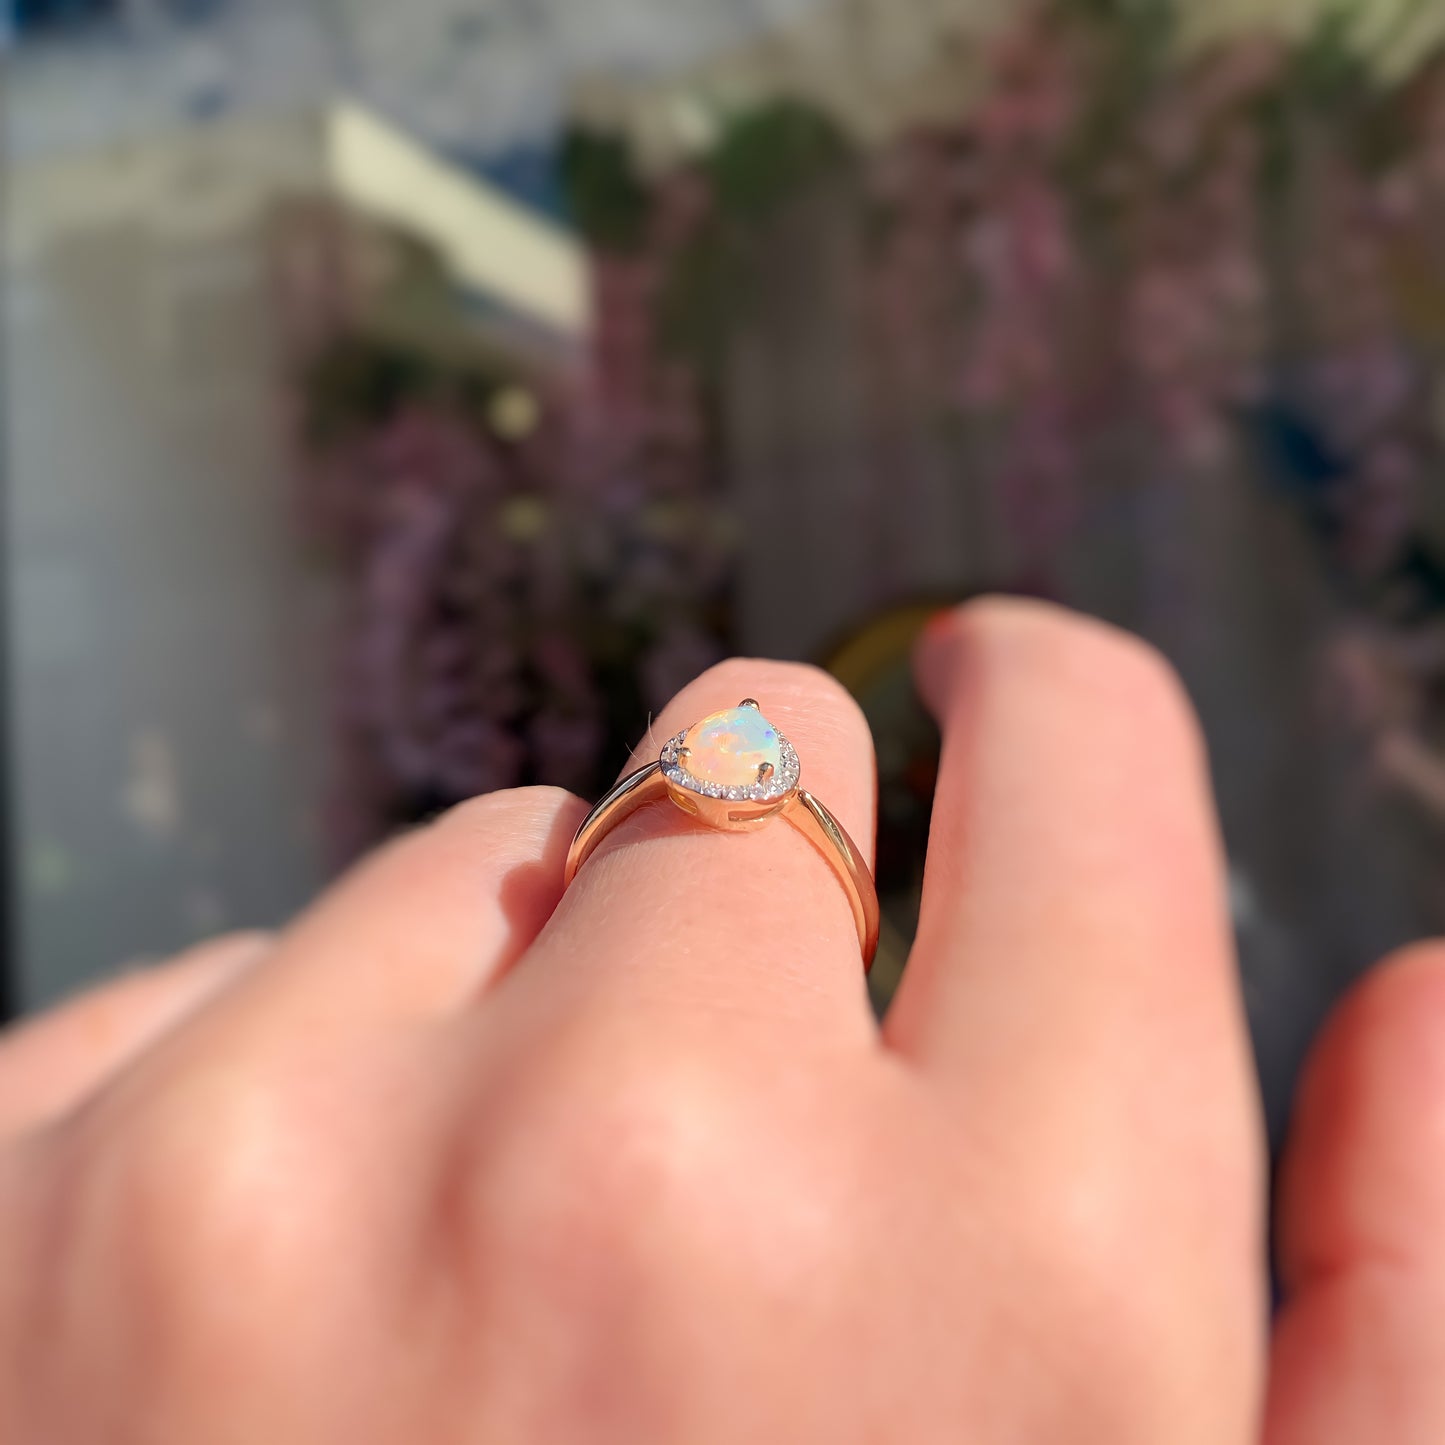 9ct Yellow Gold Opal and Diamond Pear Shaped Halo Ring - Size O